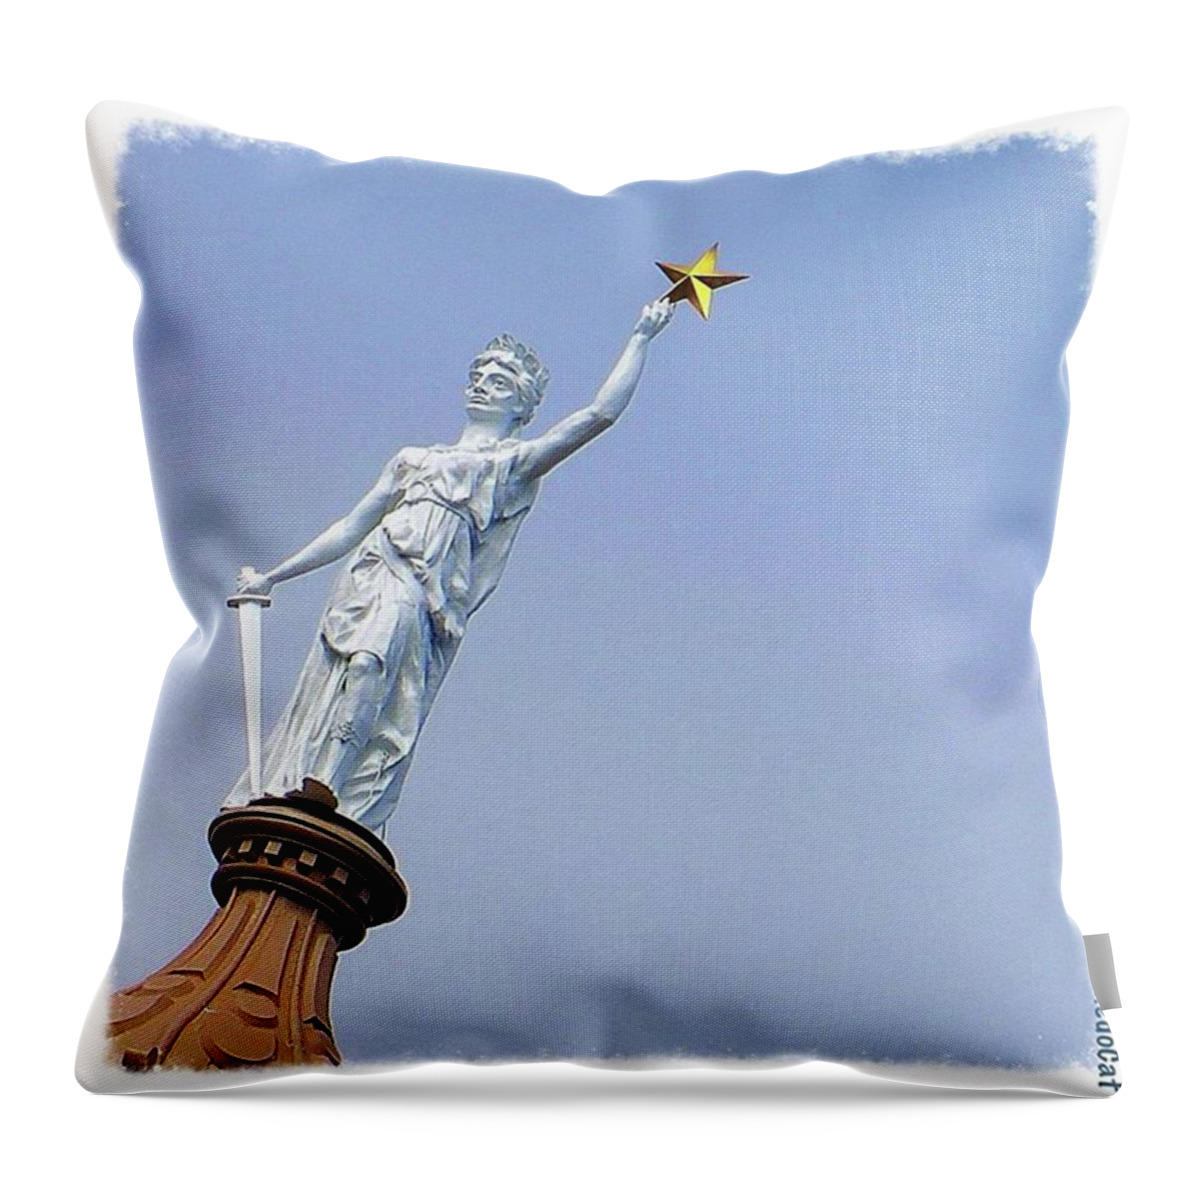 Keepaustinweird Throw Pillow featuring the photograph Up Close And Personal With The #goddess by Austin Tuxedo Cat